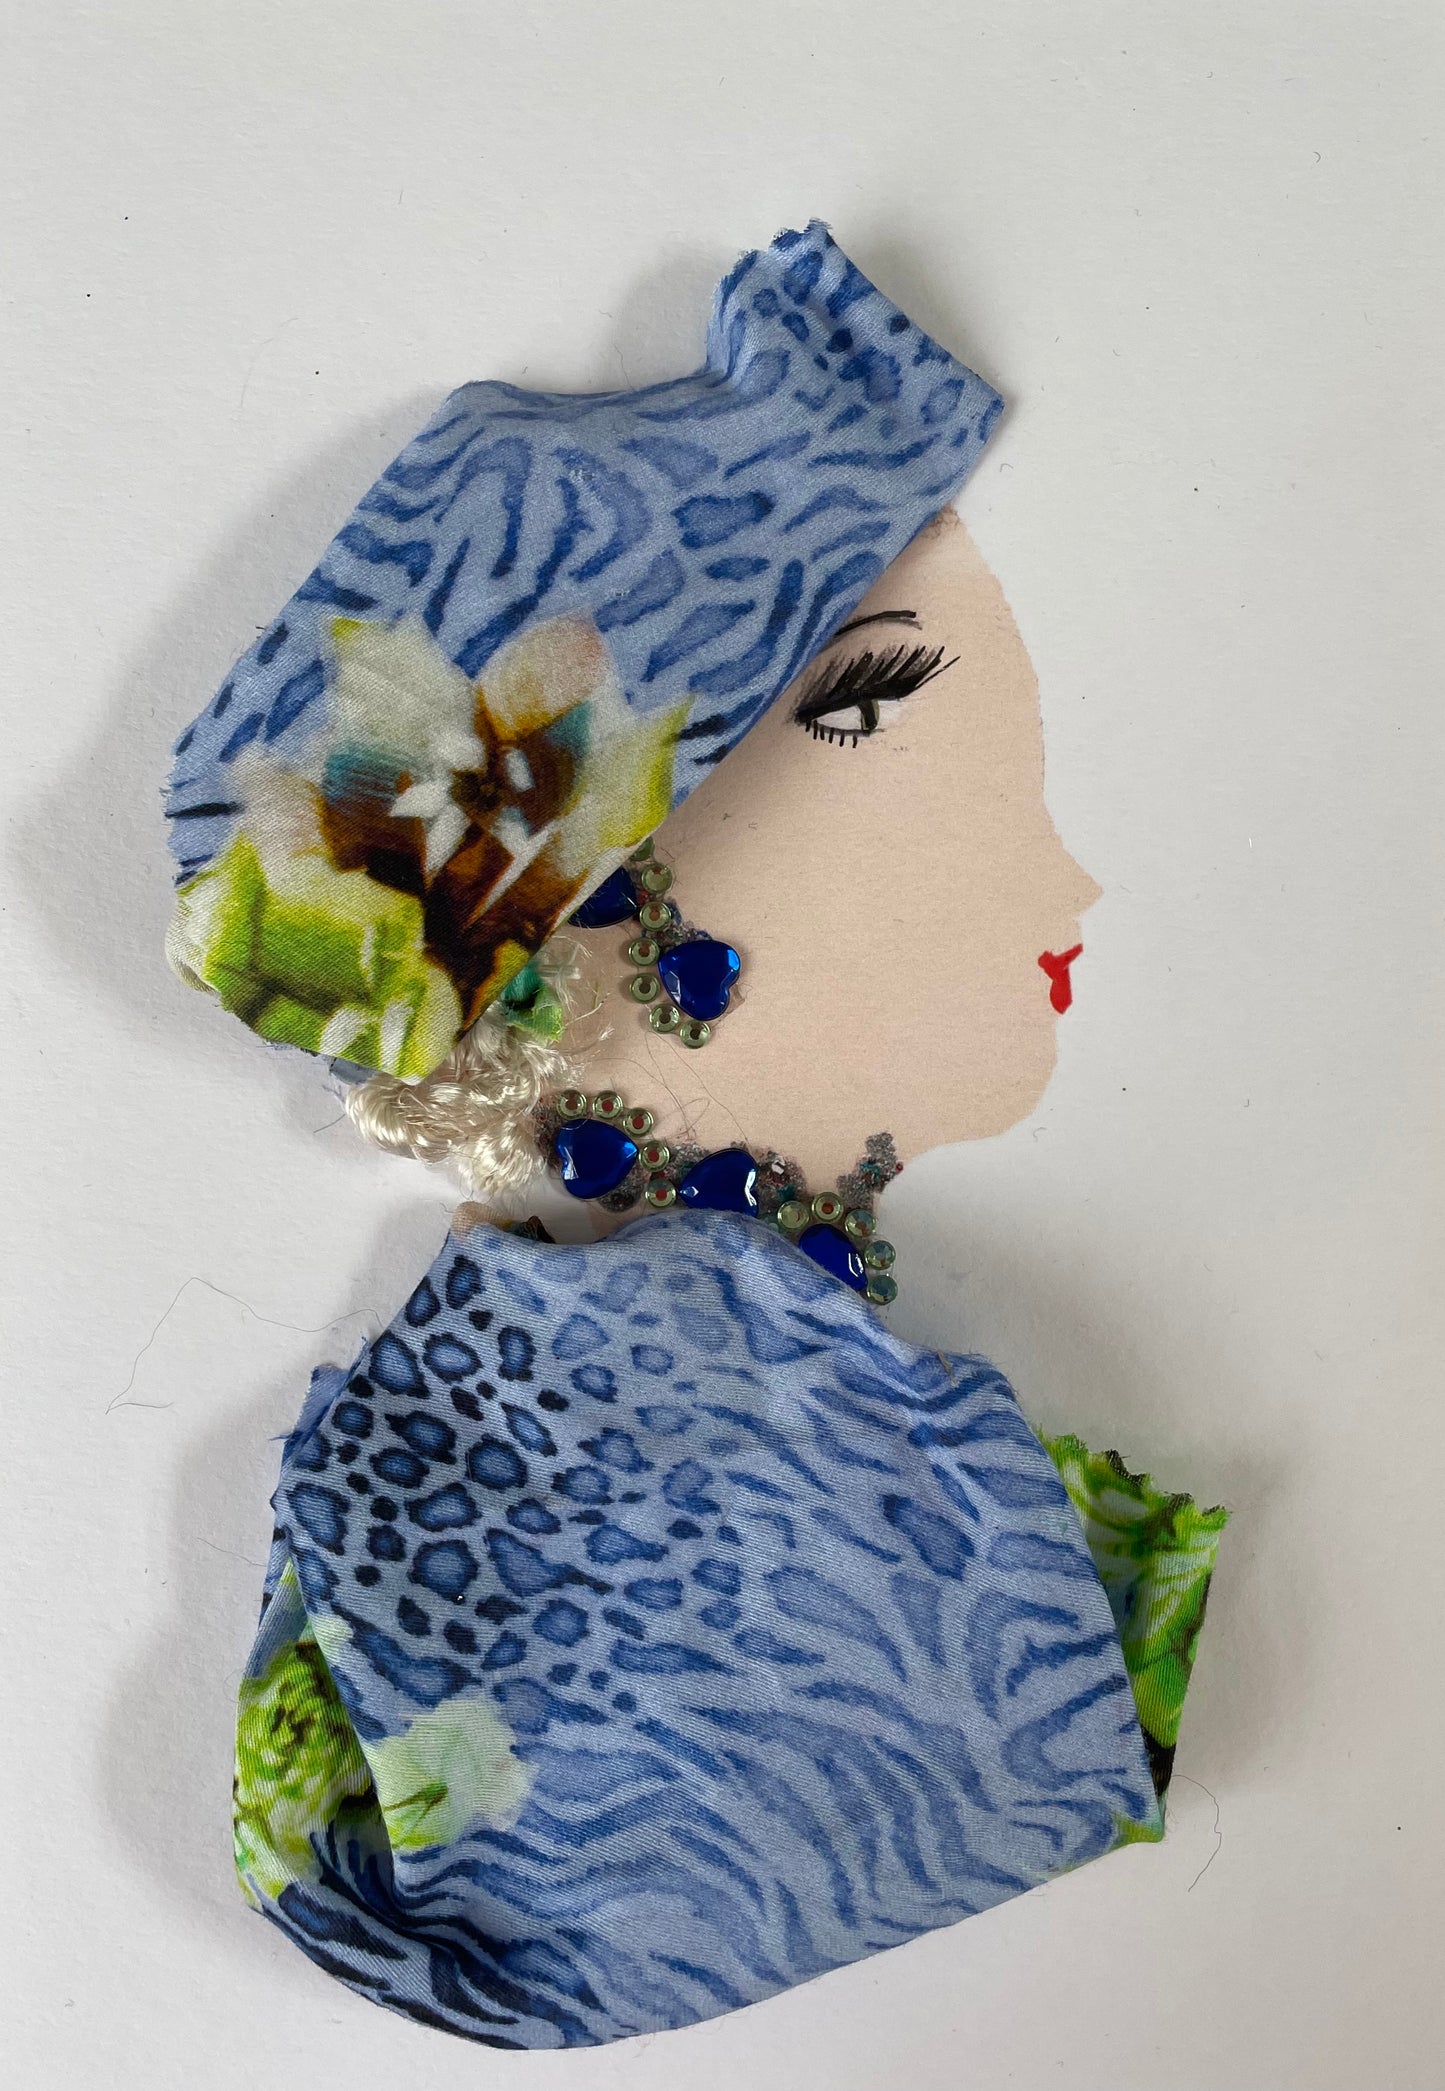 I designed this card of a woman named Dawn Dalston. She has a white skin tone and wears a blue floral headwrap. She wears a matching blouse. She wears silver and blue jewellery.